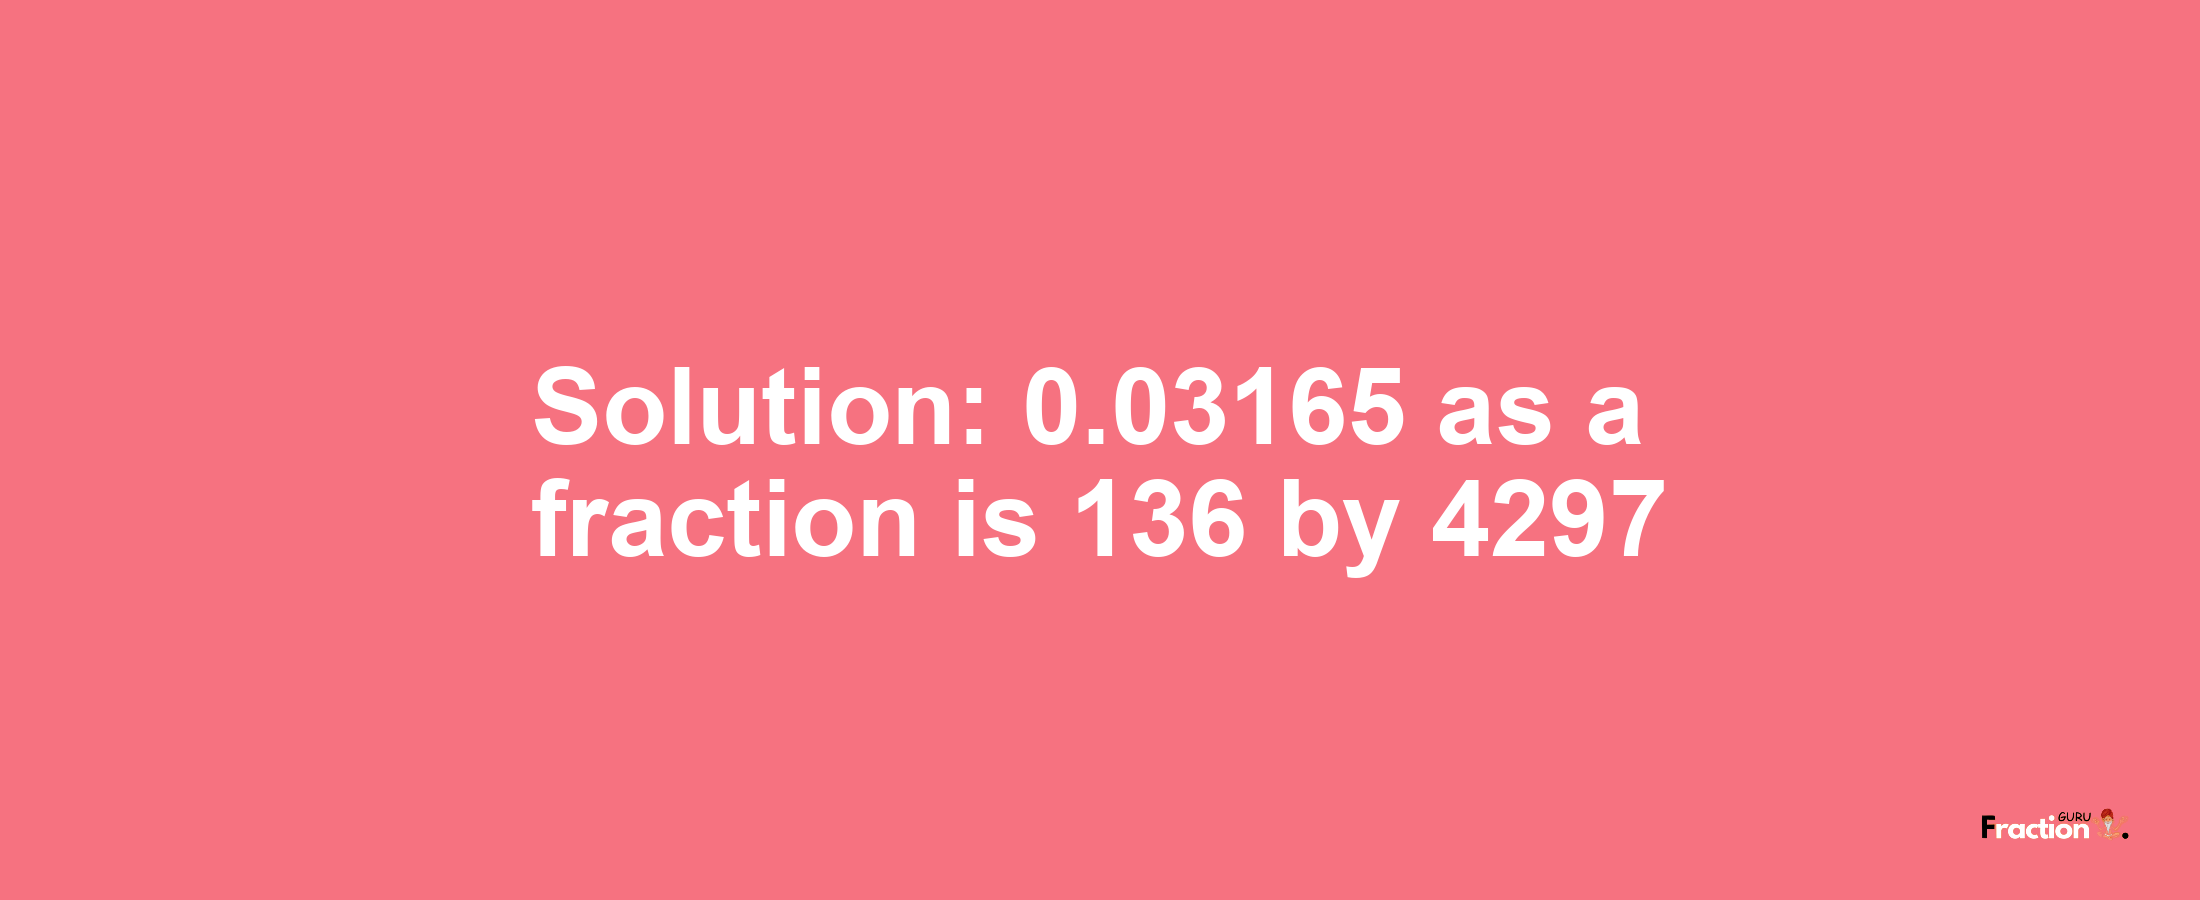 Solution:0.03165 as a fraction is 136/4297